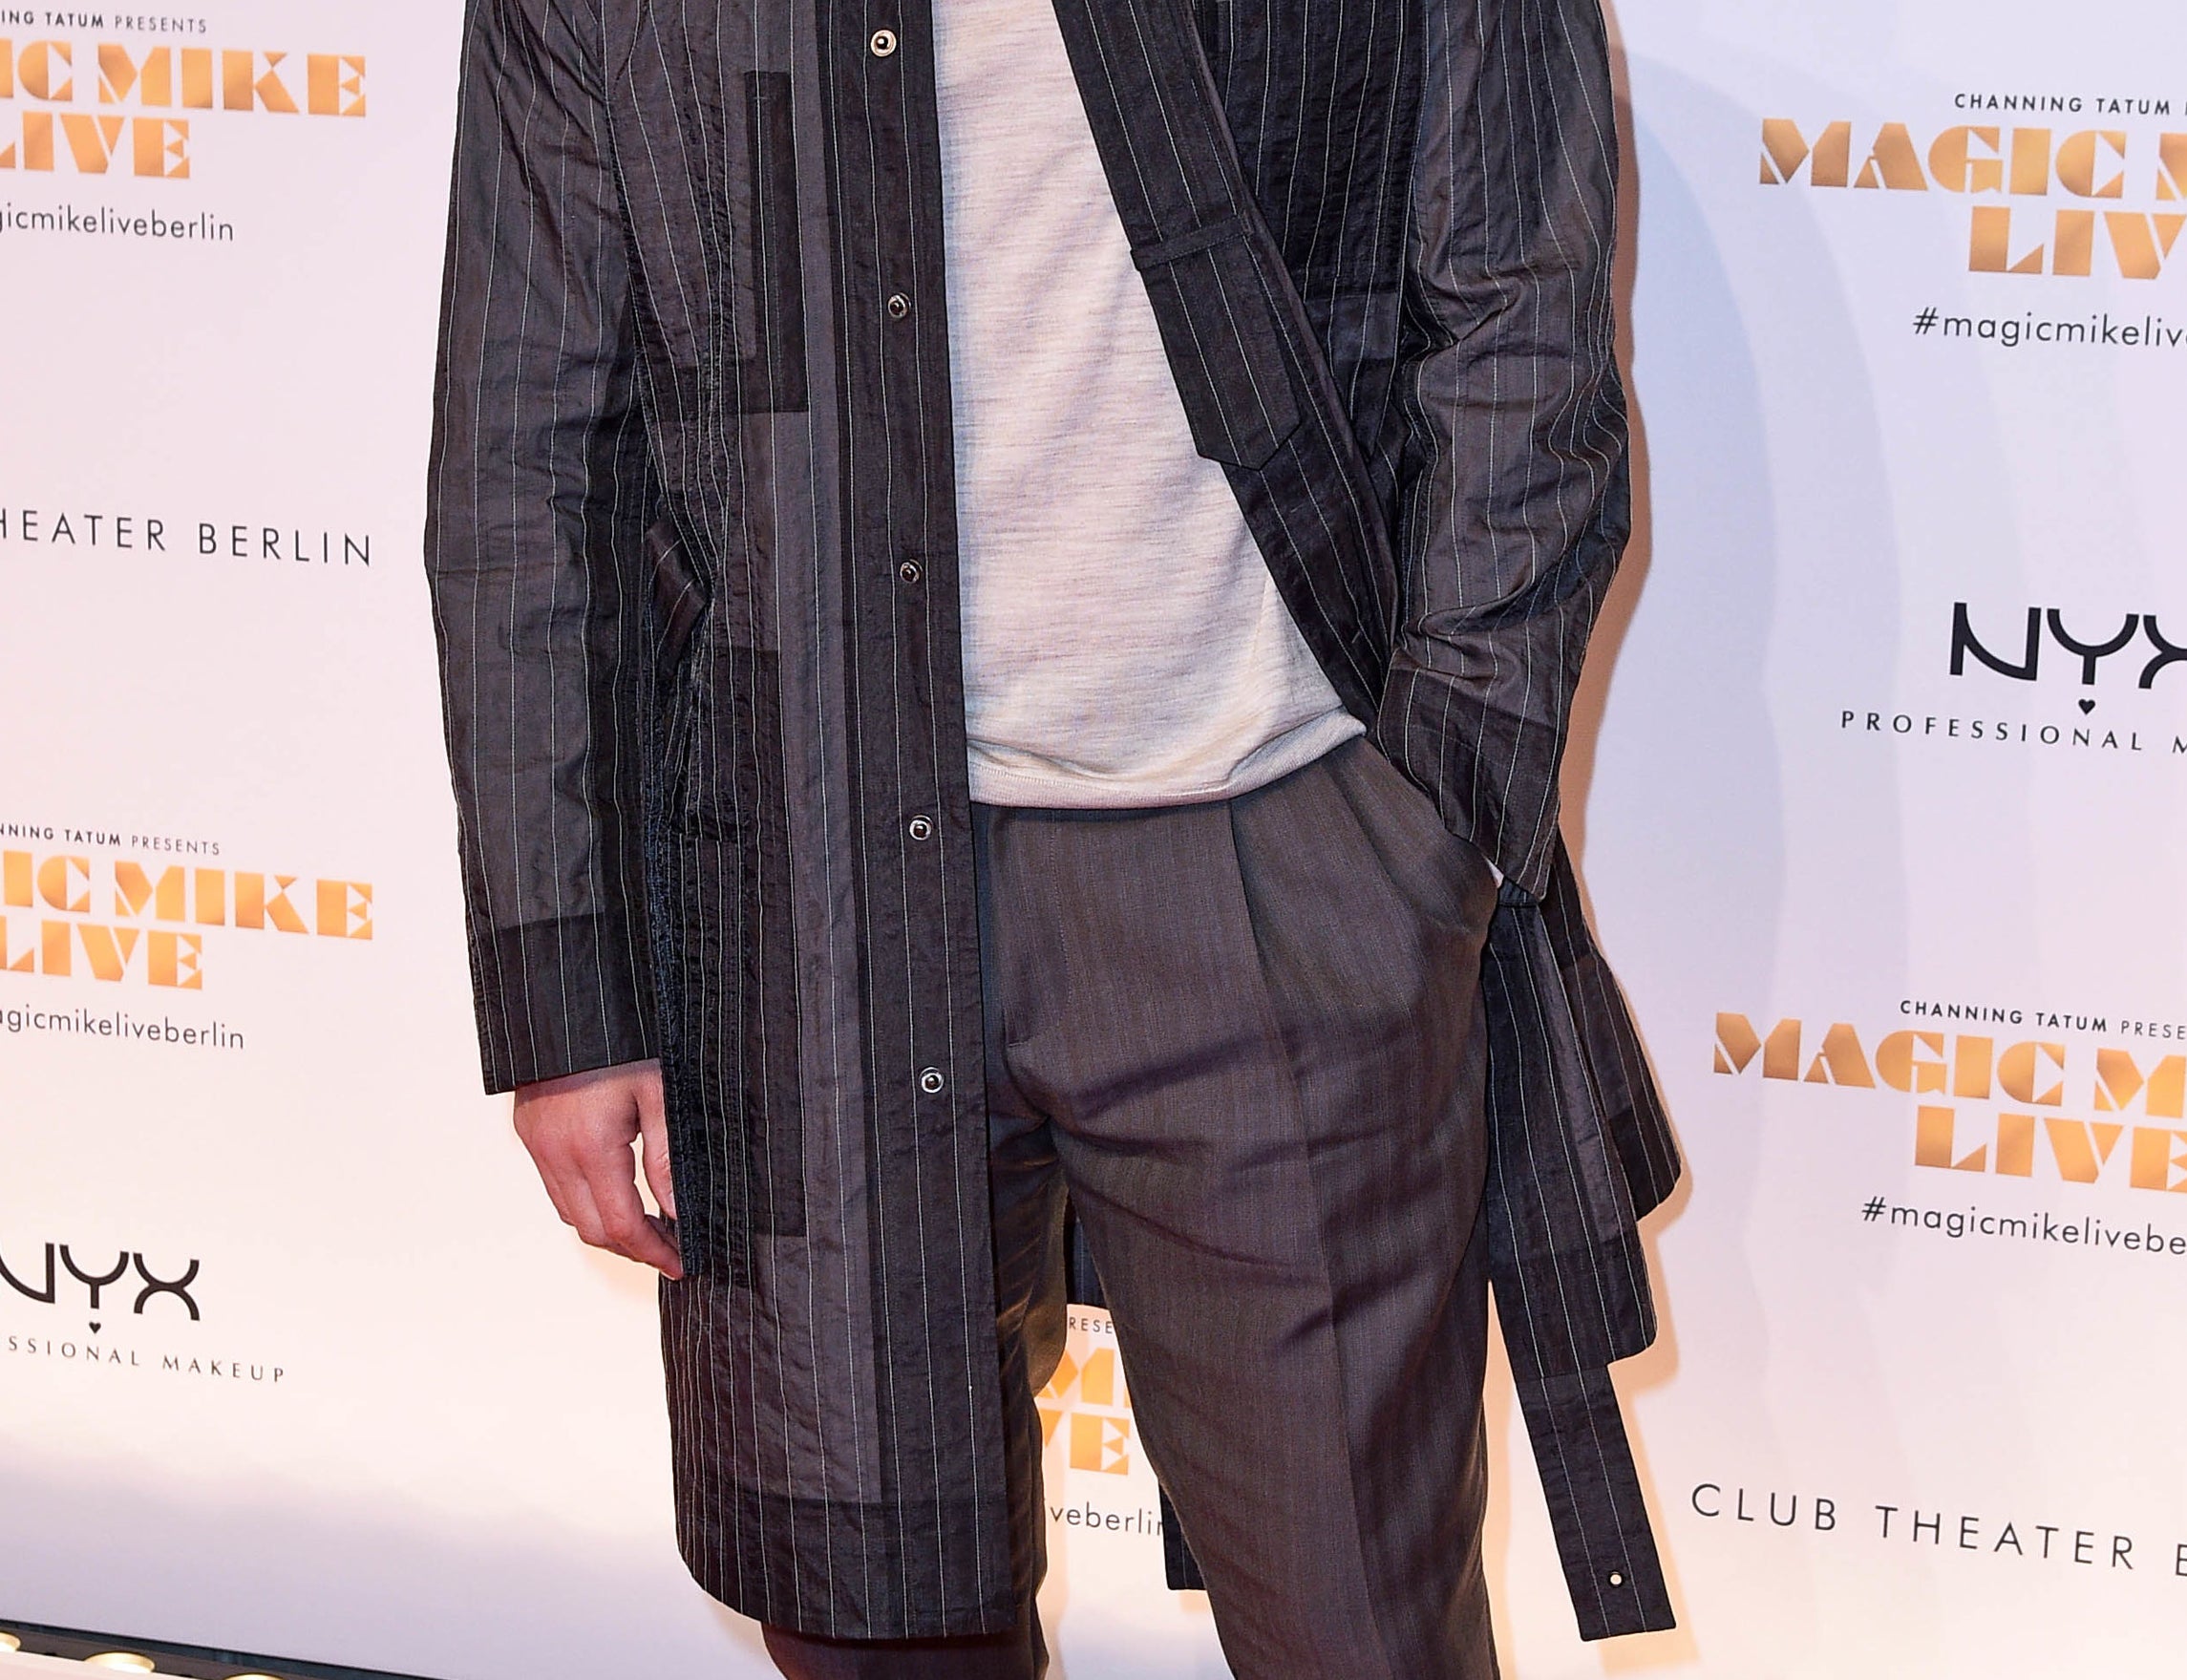 Channing wears a pin-striped jacket and gray turtleneck to an event